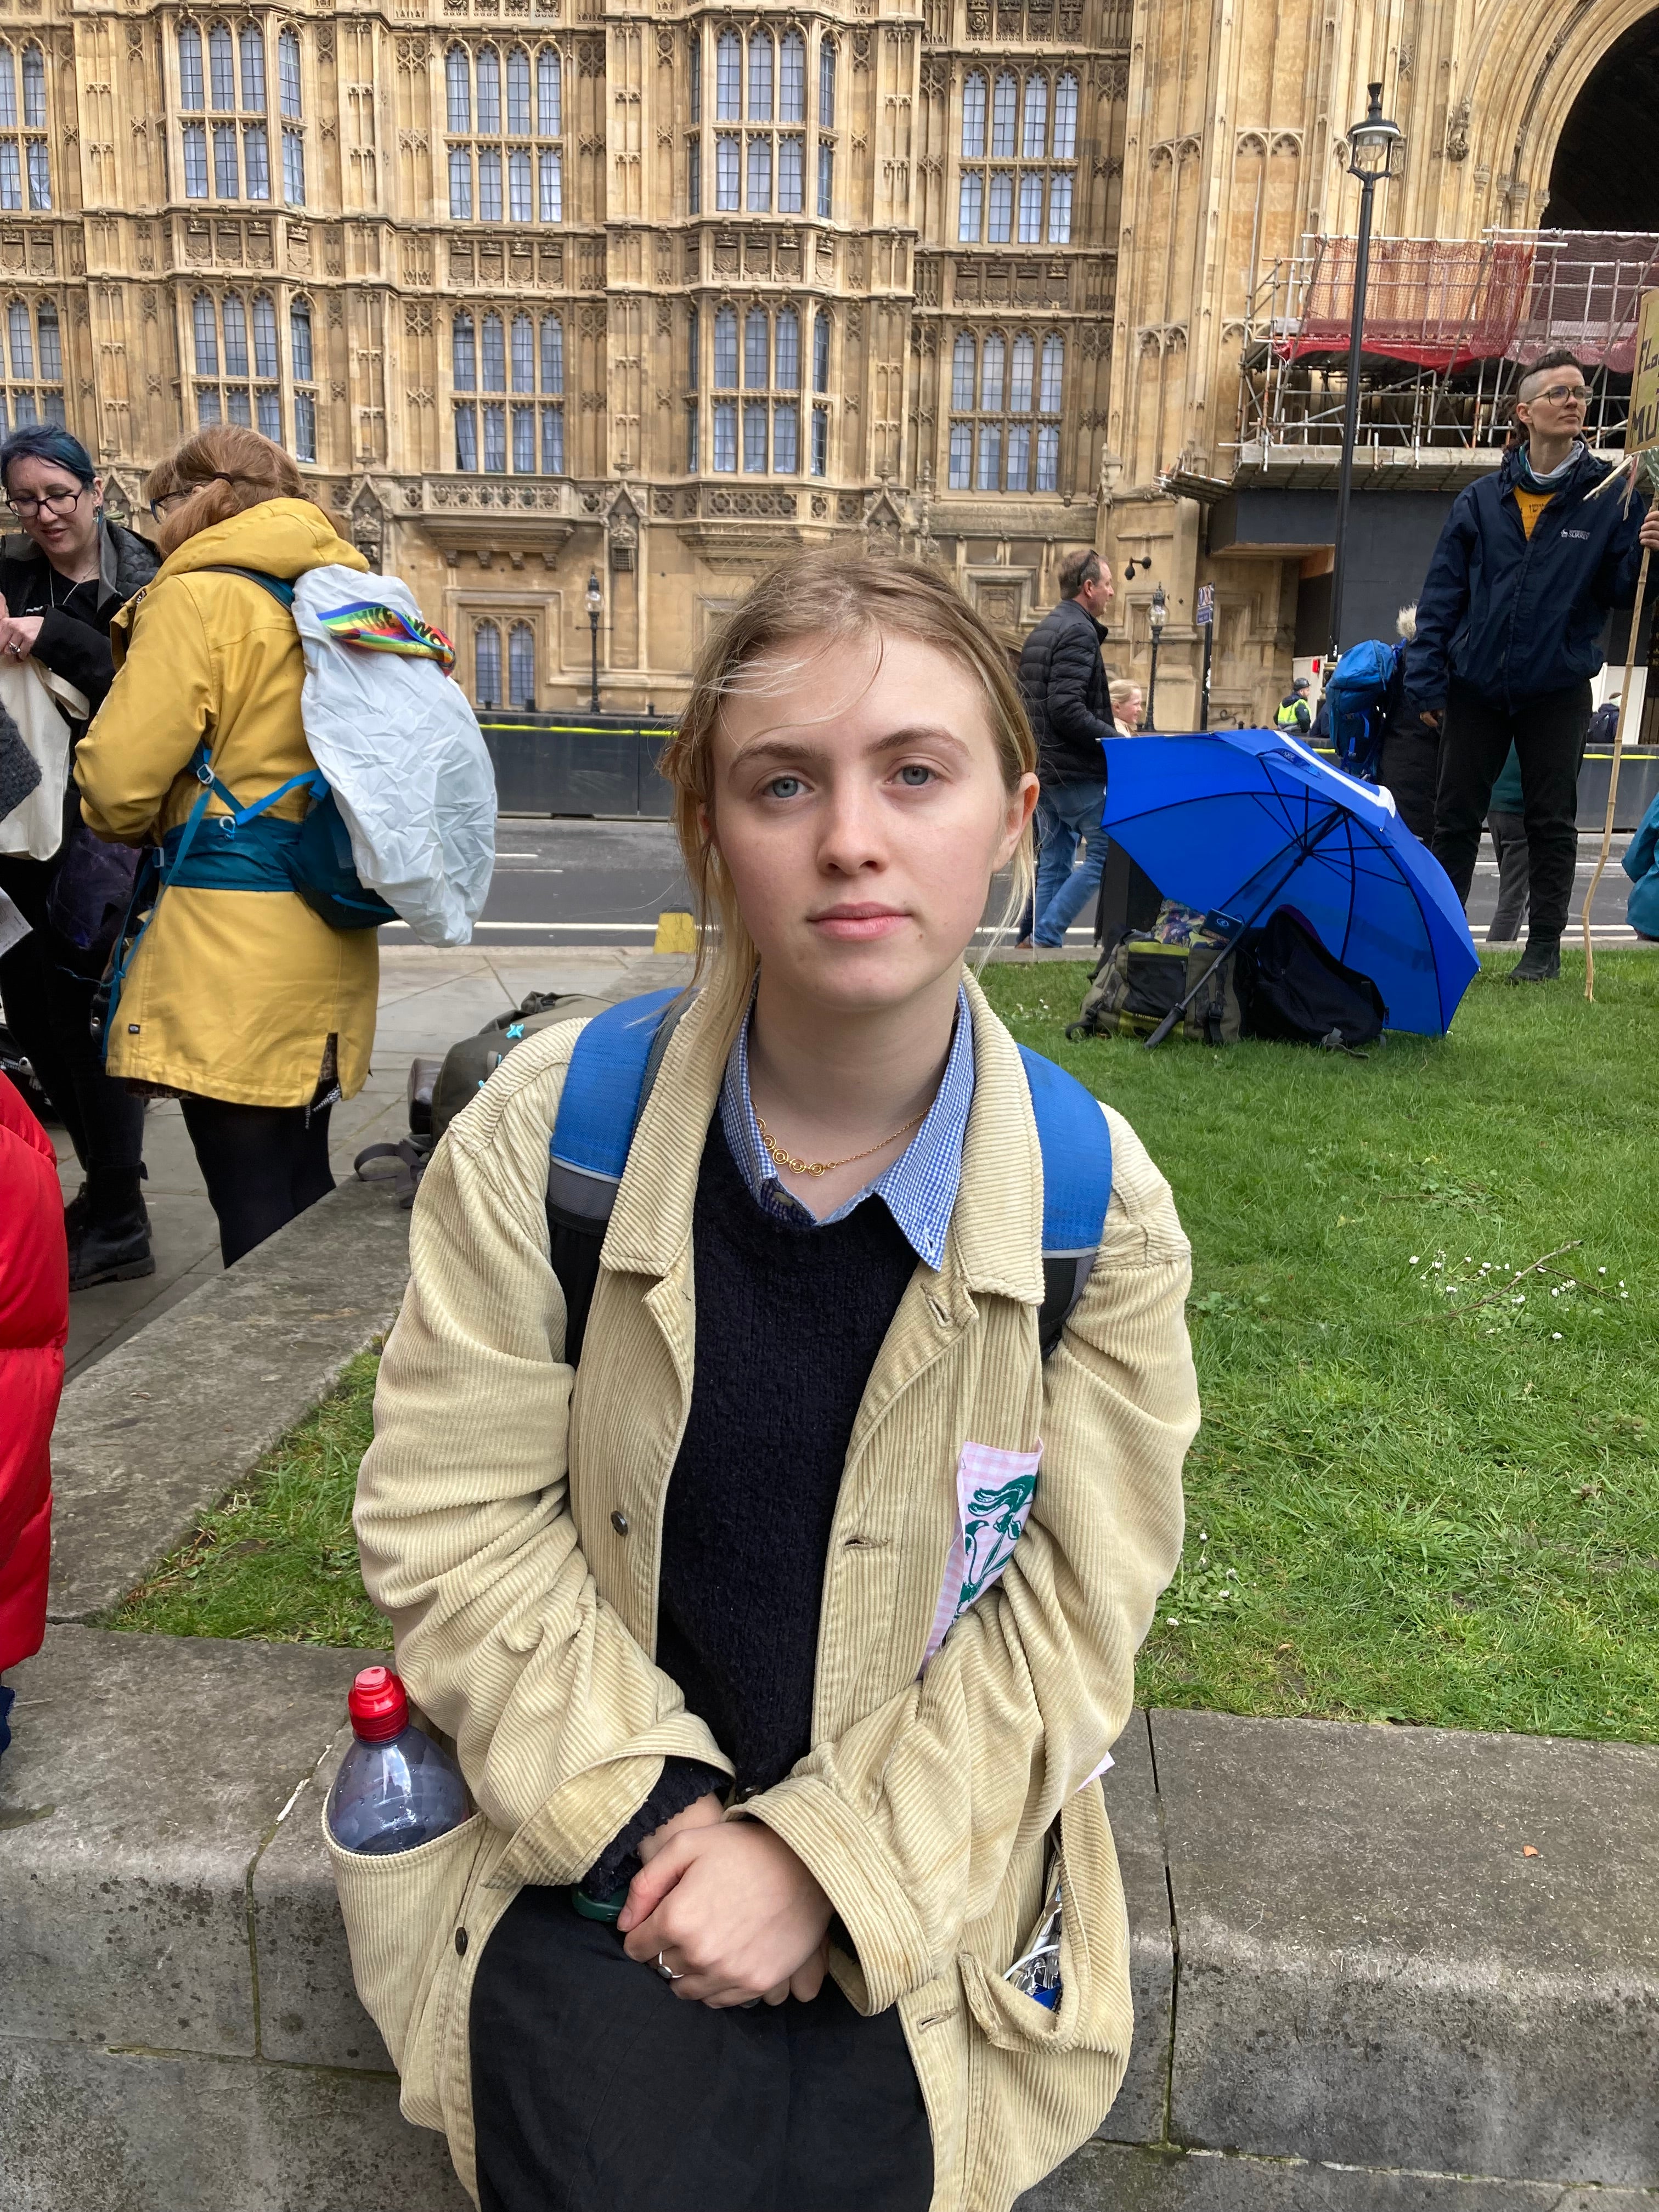 Student Iona Ogilvy-Stuart believes the government need to listen to everyone’s voices